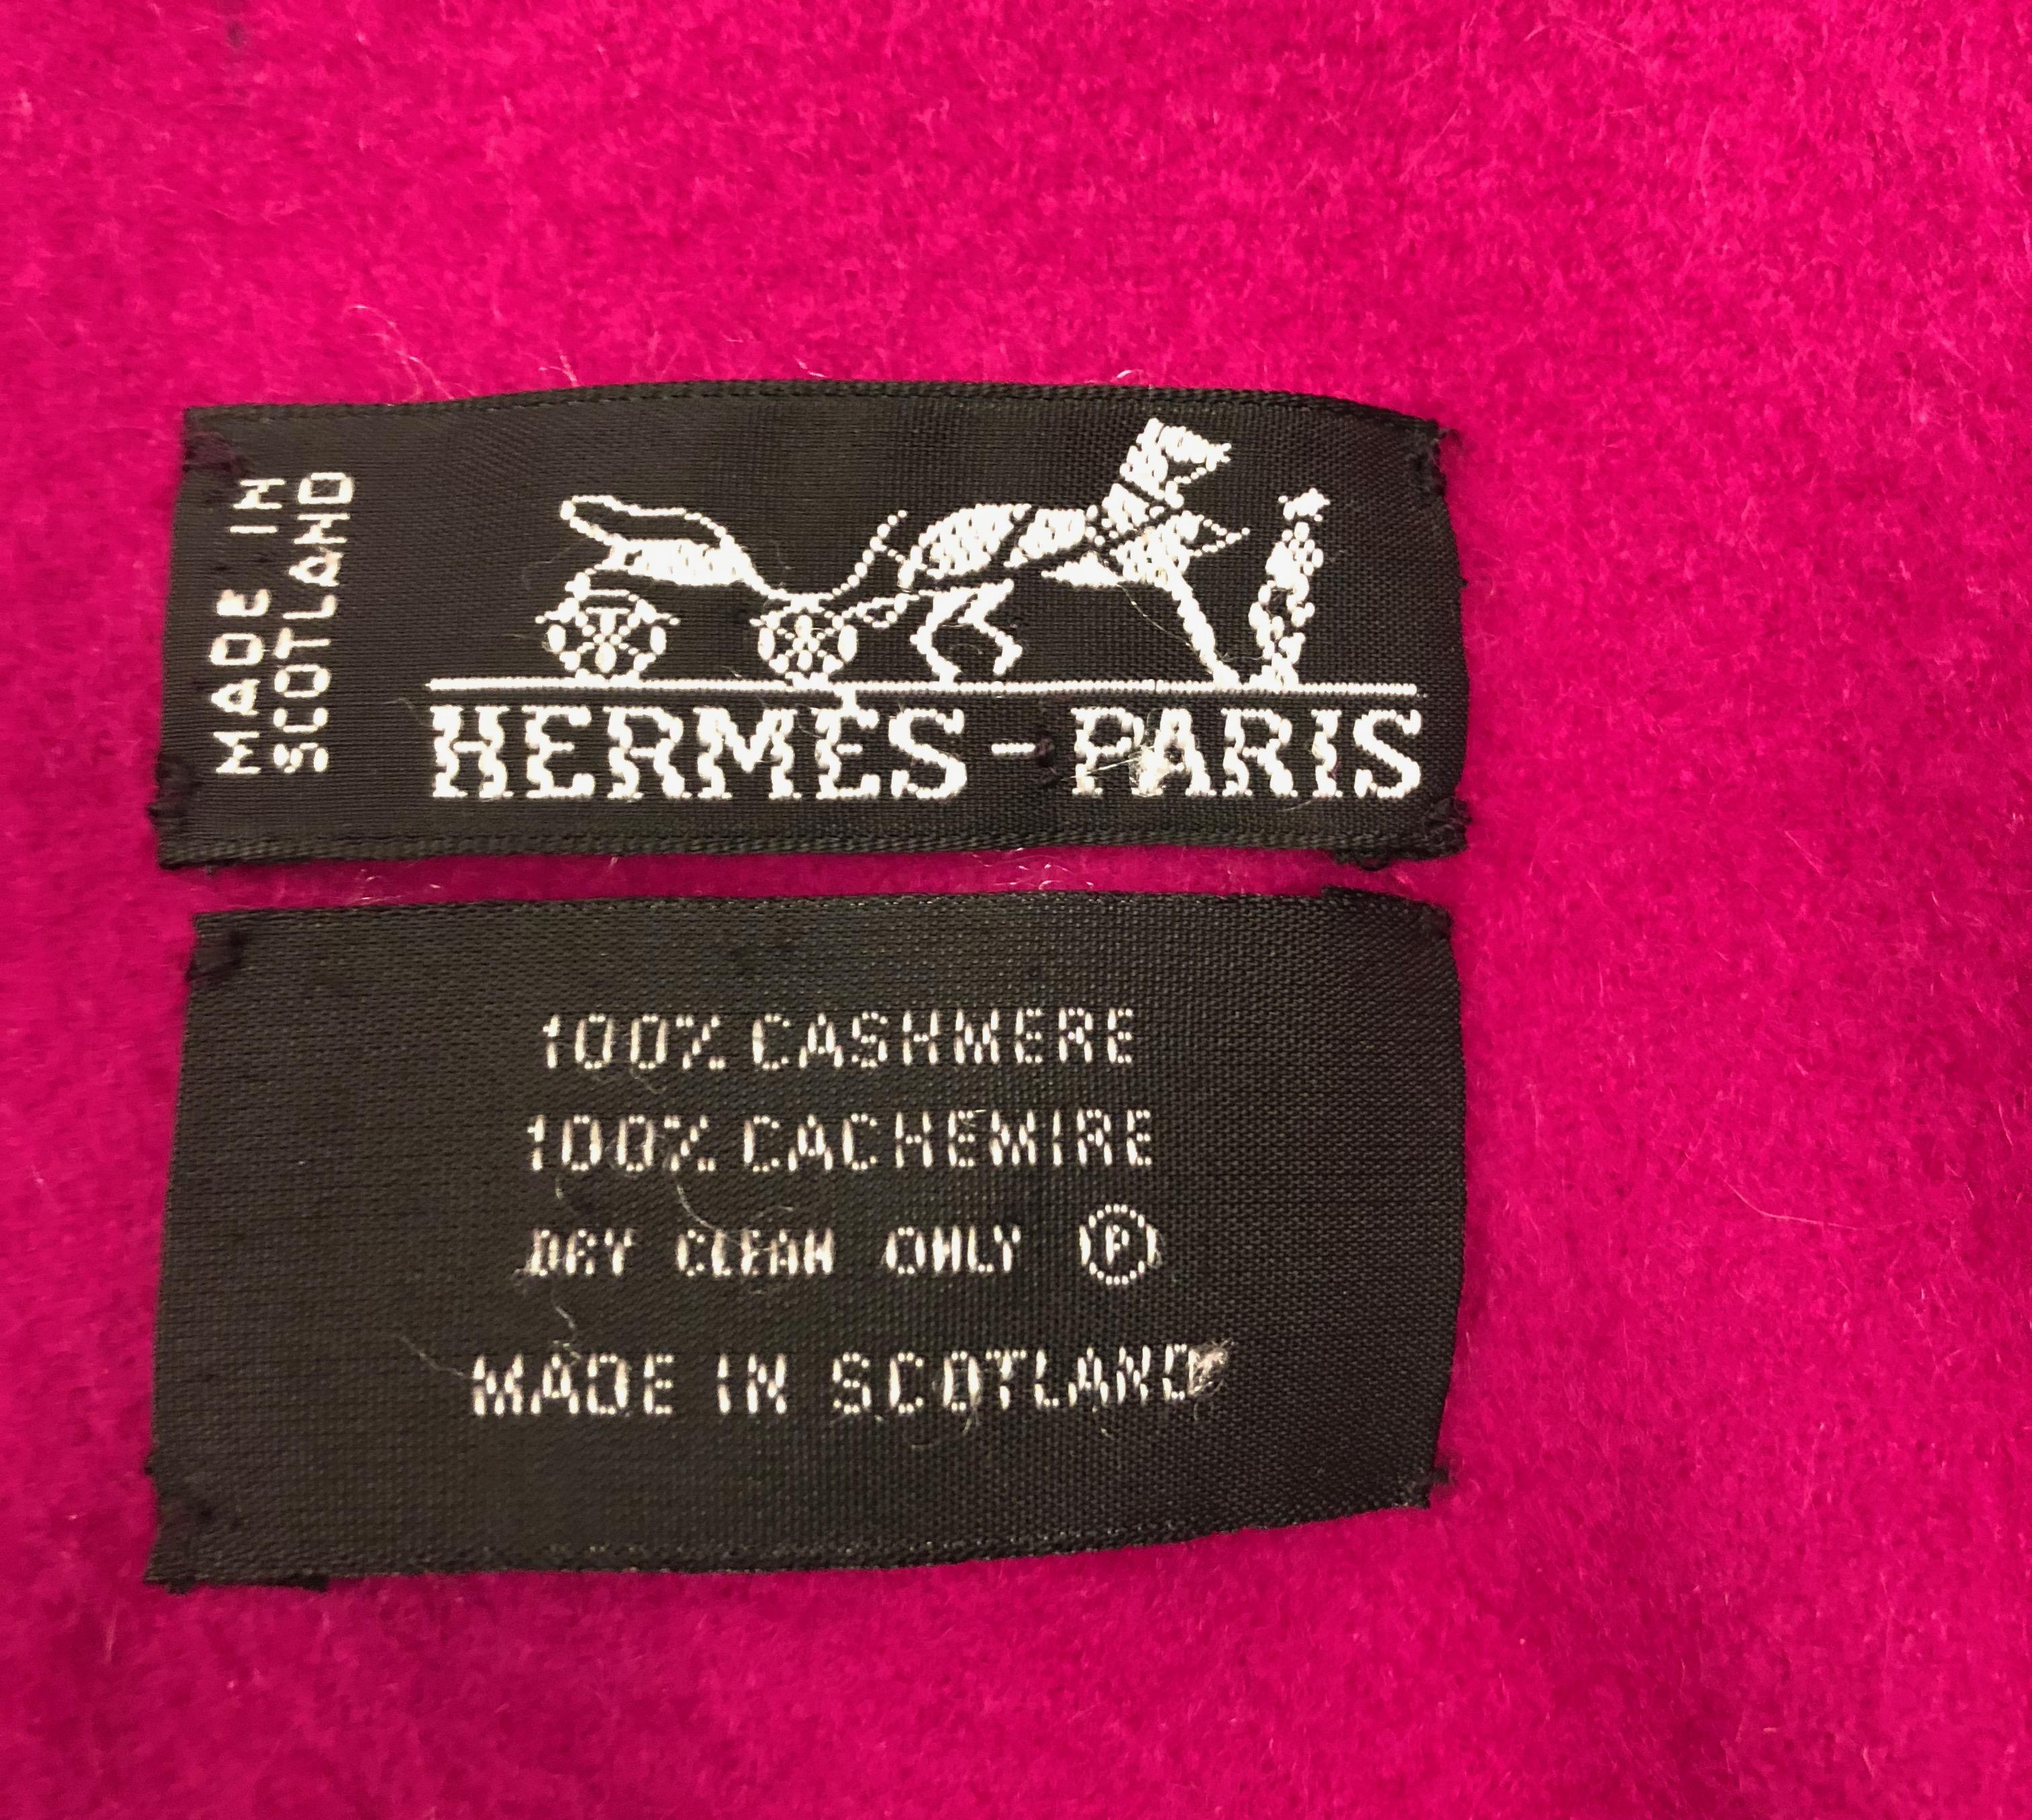 Presented here is a beautiful Hermes Cashmere shawl. The shawl is a most wonderful shade of magenta. It is 70 inches long with an additional  3 inches of fringe on each end making it aa total of 76 inches long and 27 inches wide. On the bottom right